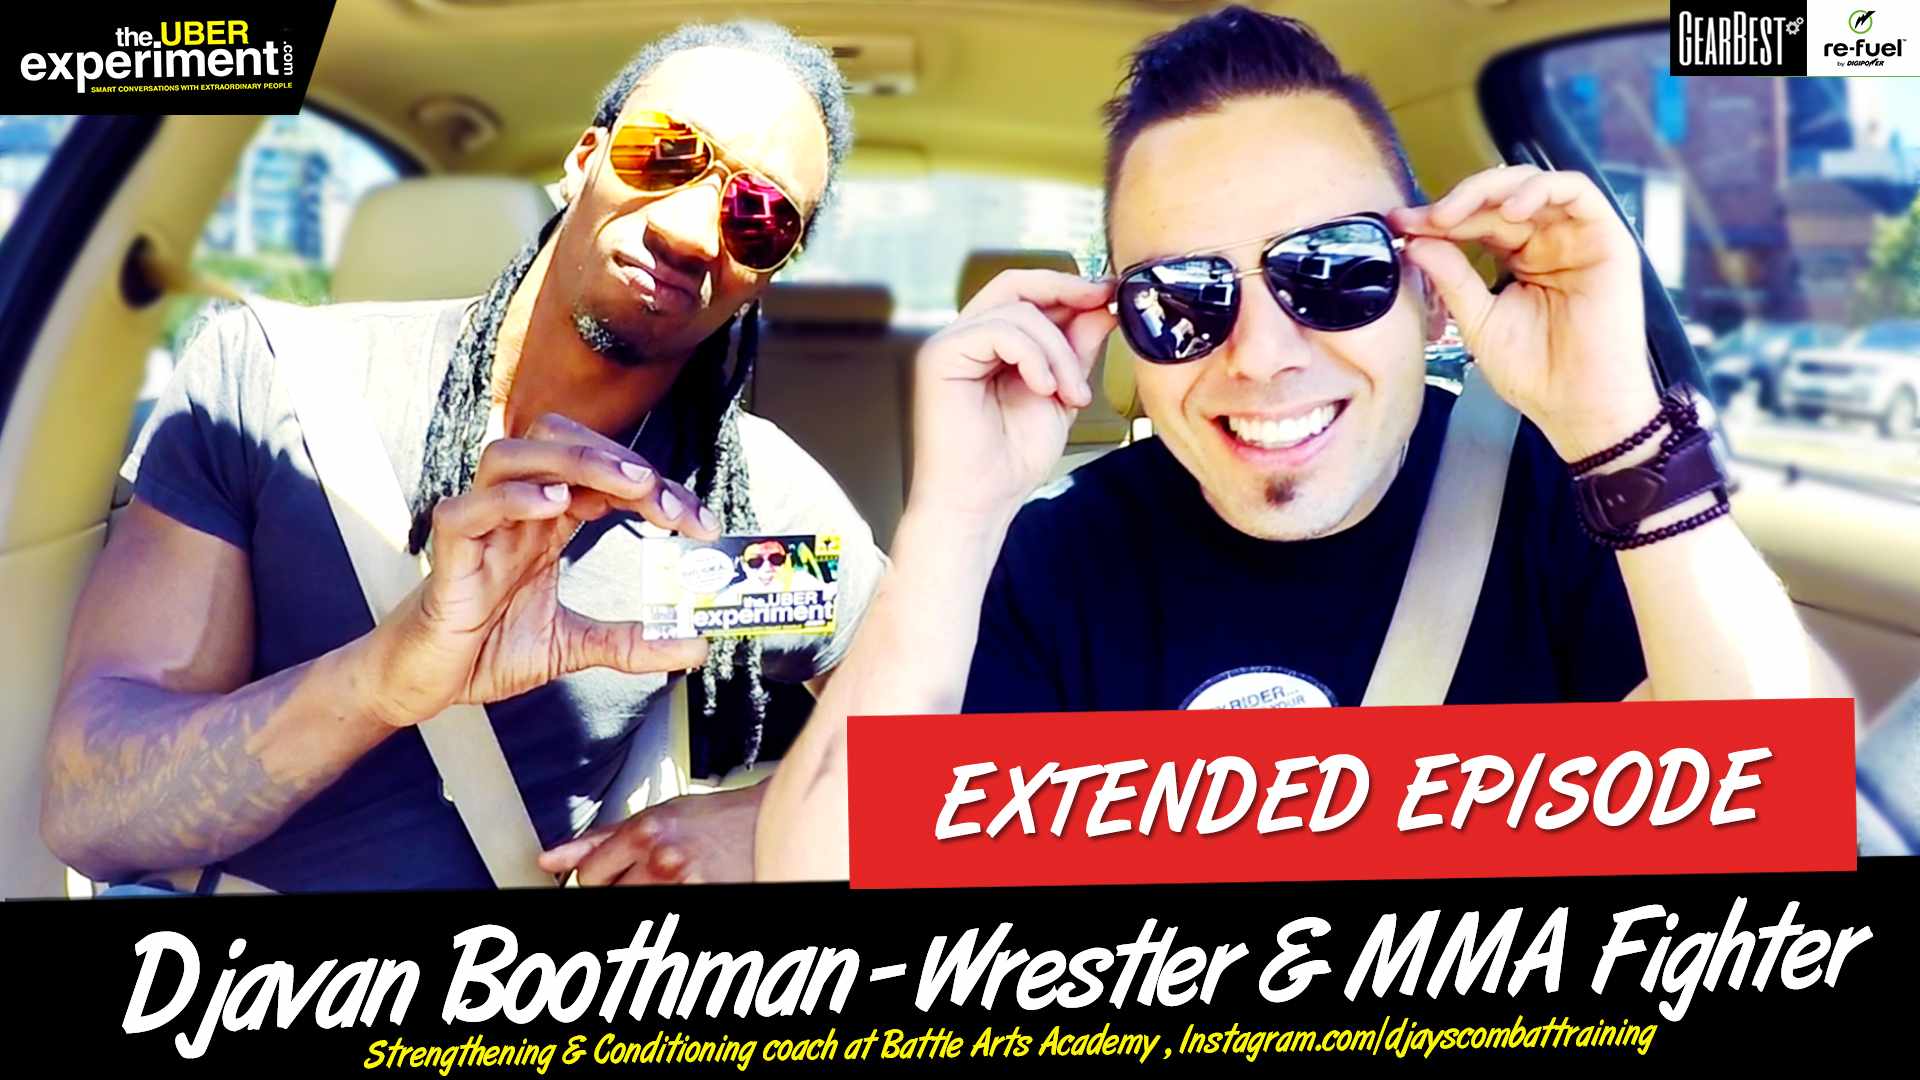 From Stealing Cars to MMA Fighting & Pandas - Trainer & Wrestler DJ Boothman On The Uber Experiment